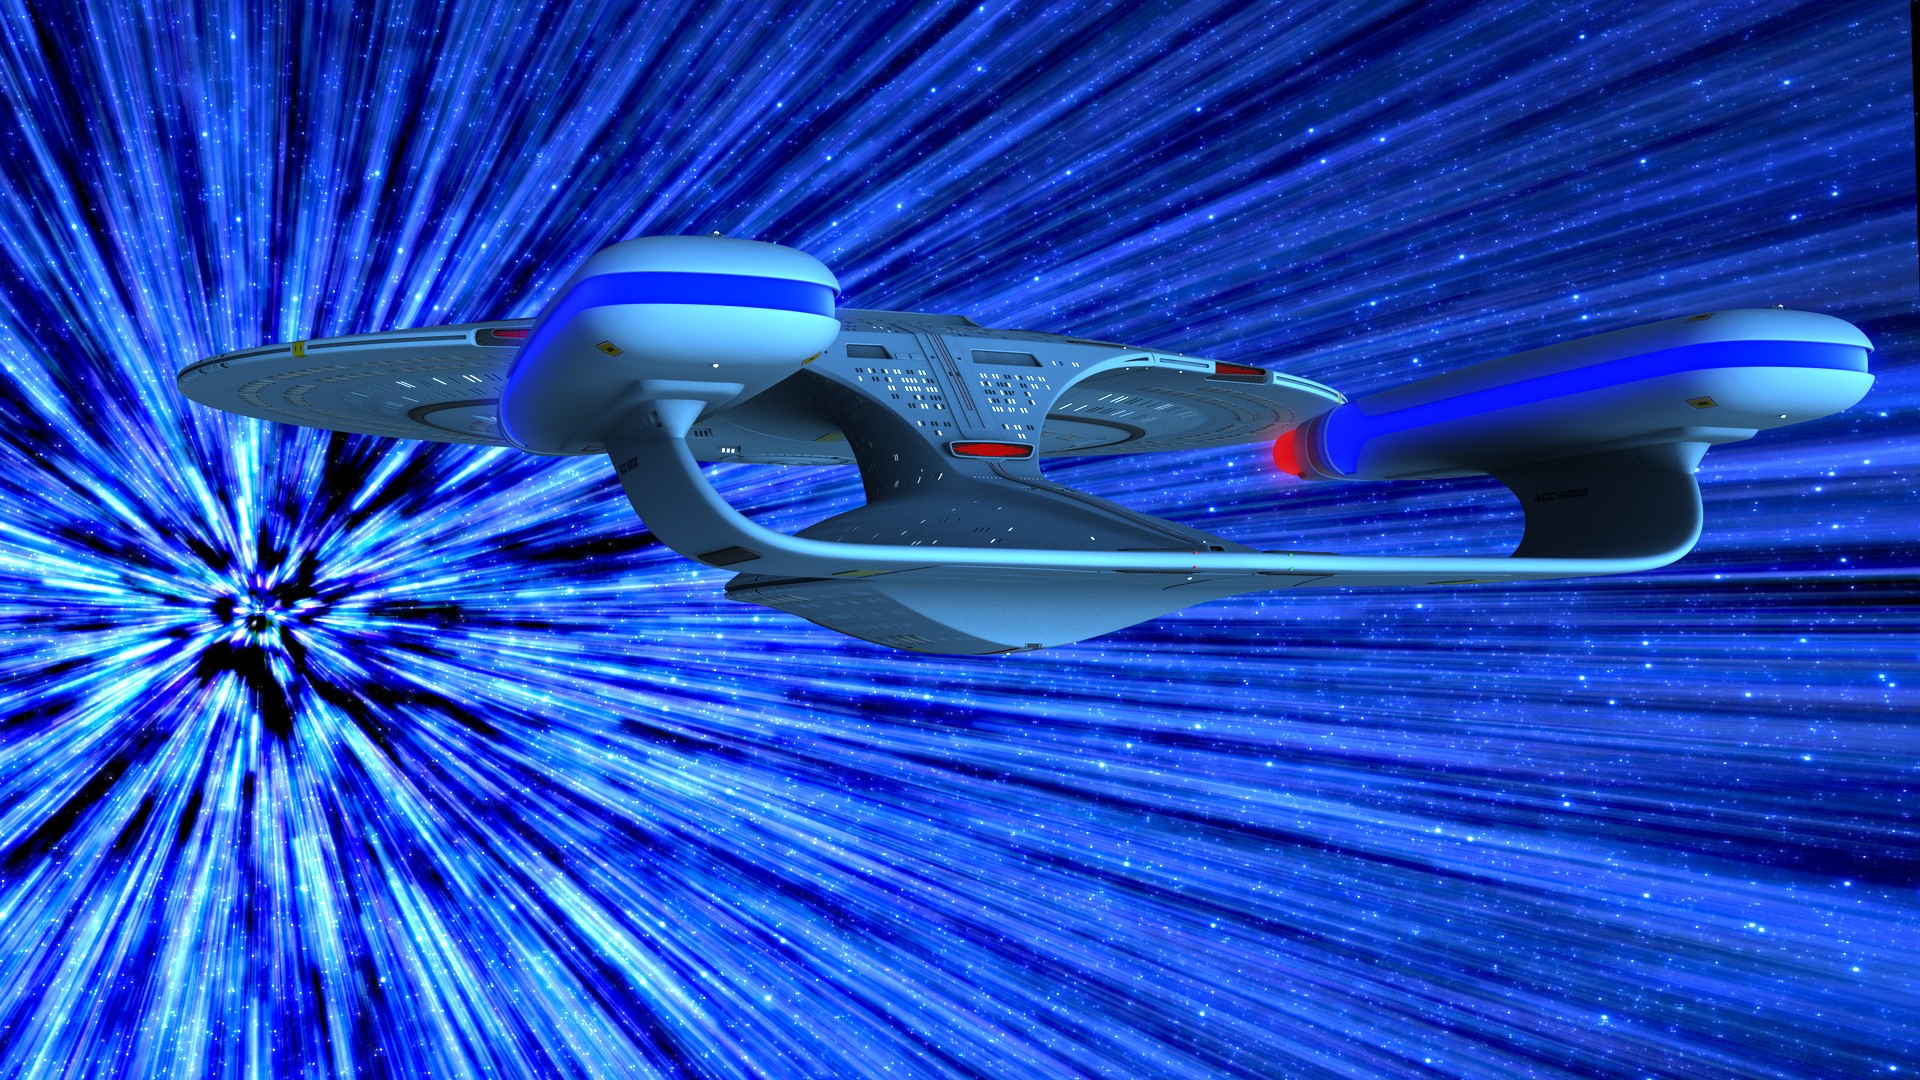 Inventions we'd like to see - Inventions we'd like to see before we die - warp drive